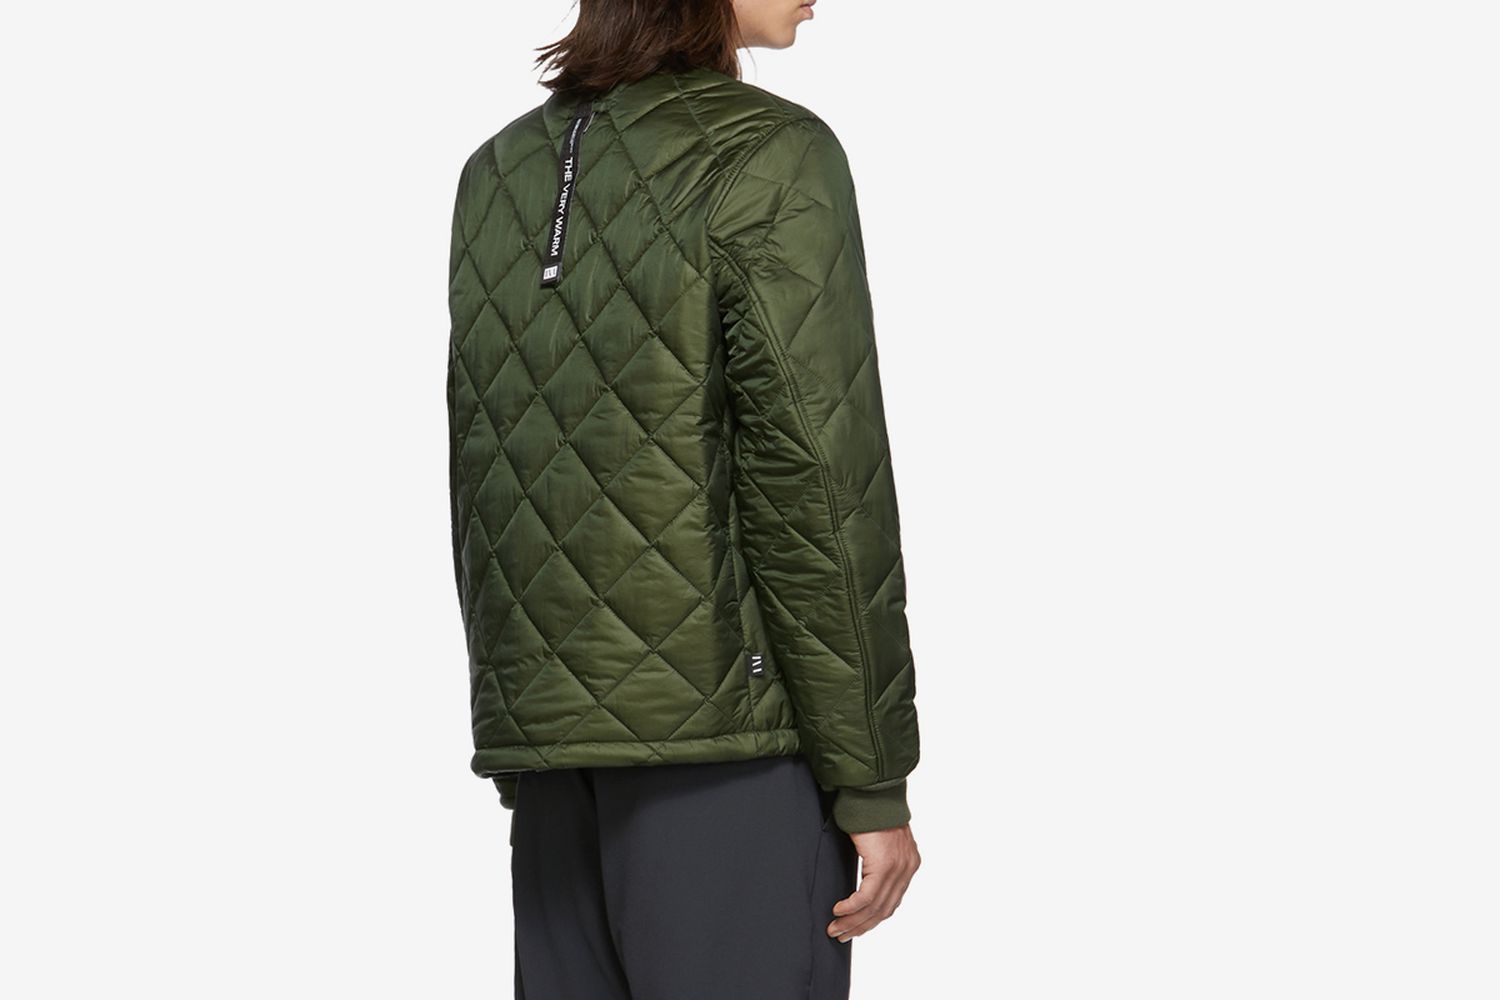 The Best Quilted Jackets & Vests for Fall/Winter 2019